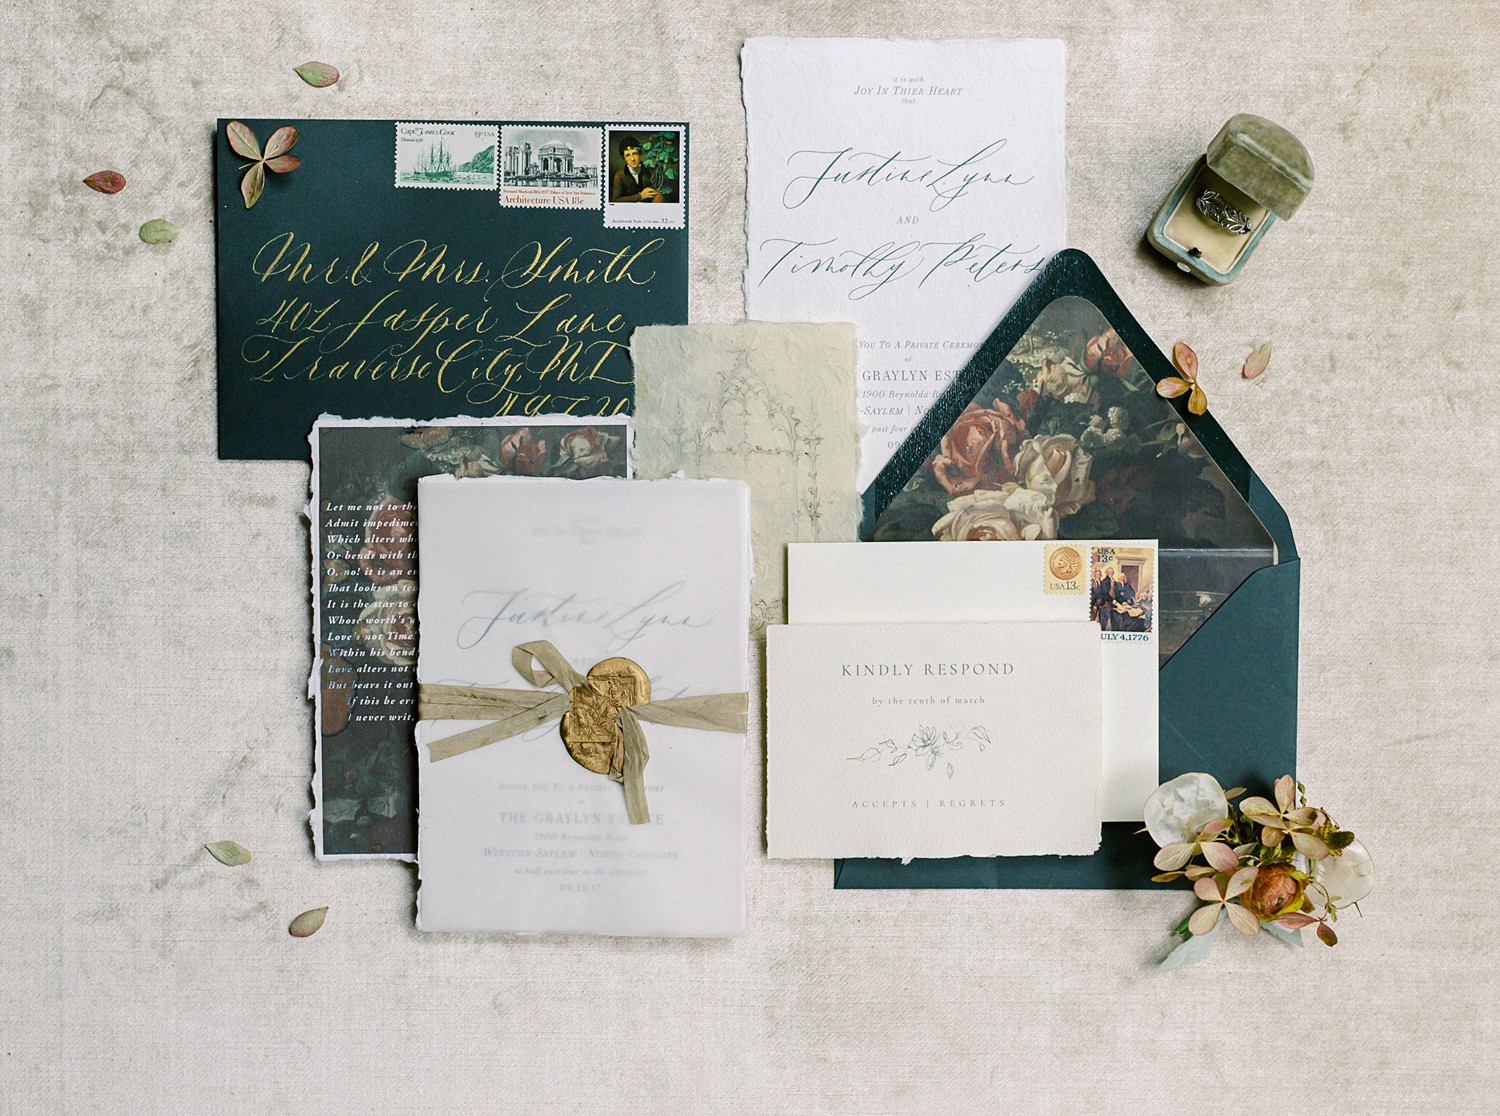 Asheville elopement photographer Emily Fleming photographs a beautiful wedding invitation. 10 things to know before you elope